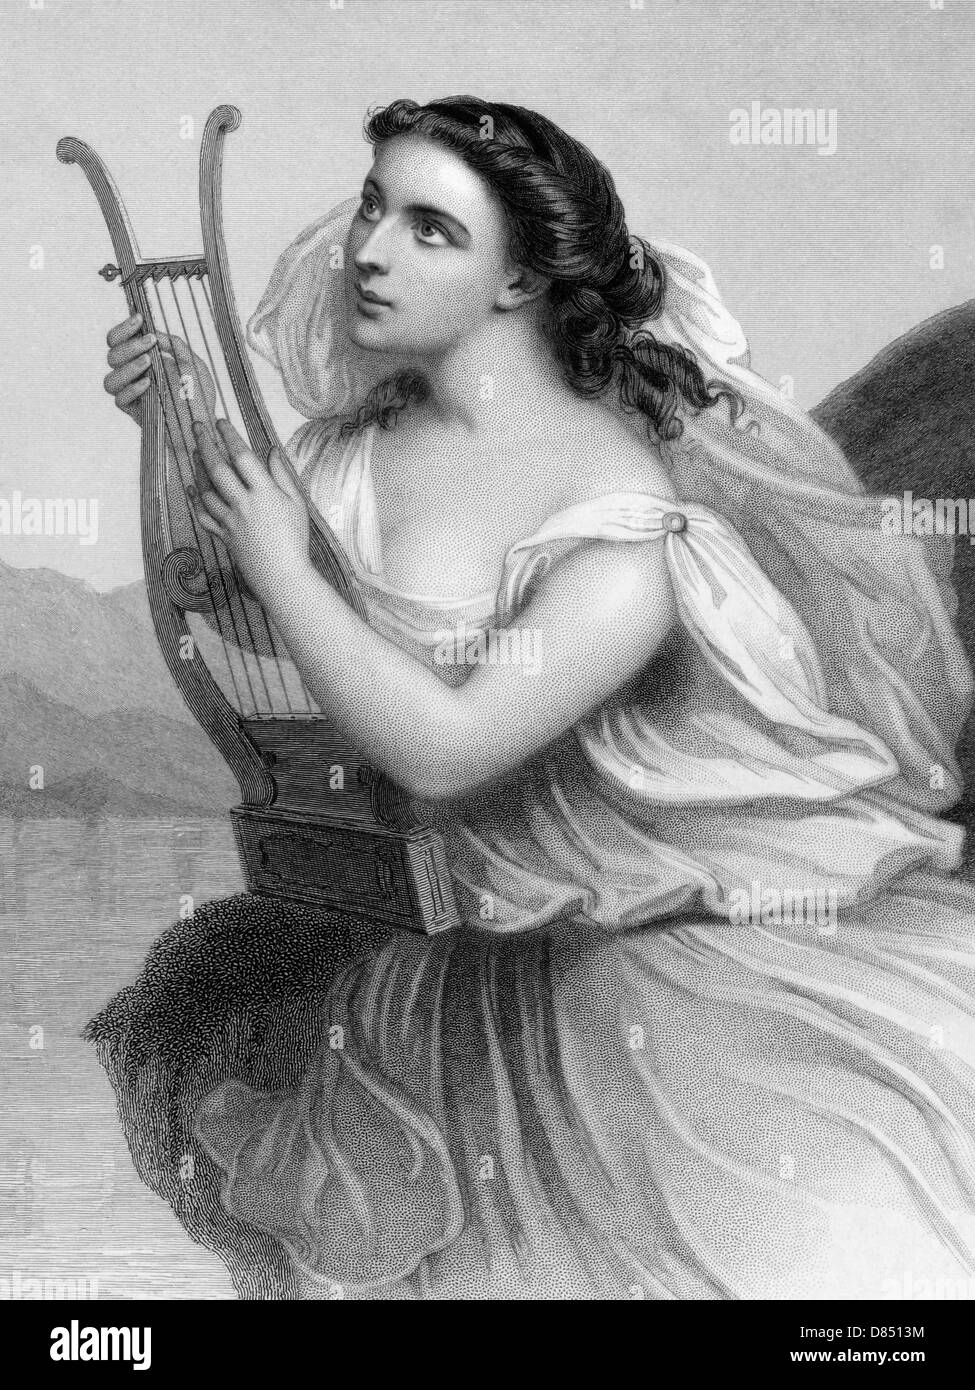 Sappho (630/612-570 BC) on engraving from 1858. Ancient Greek lyric poet. Stock Photo